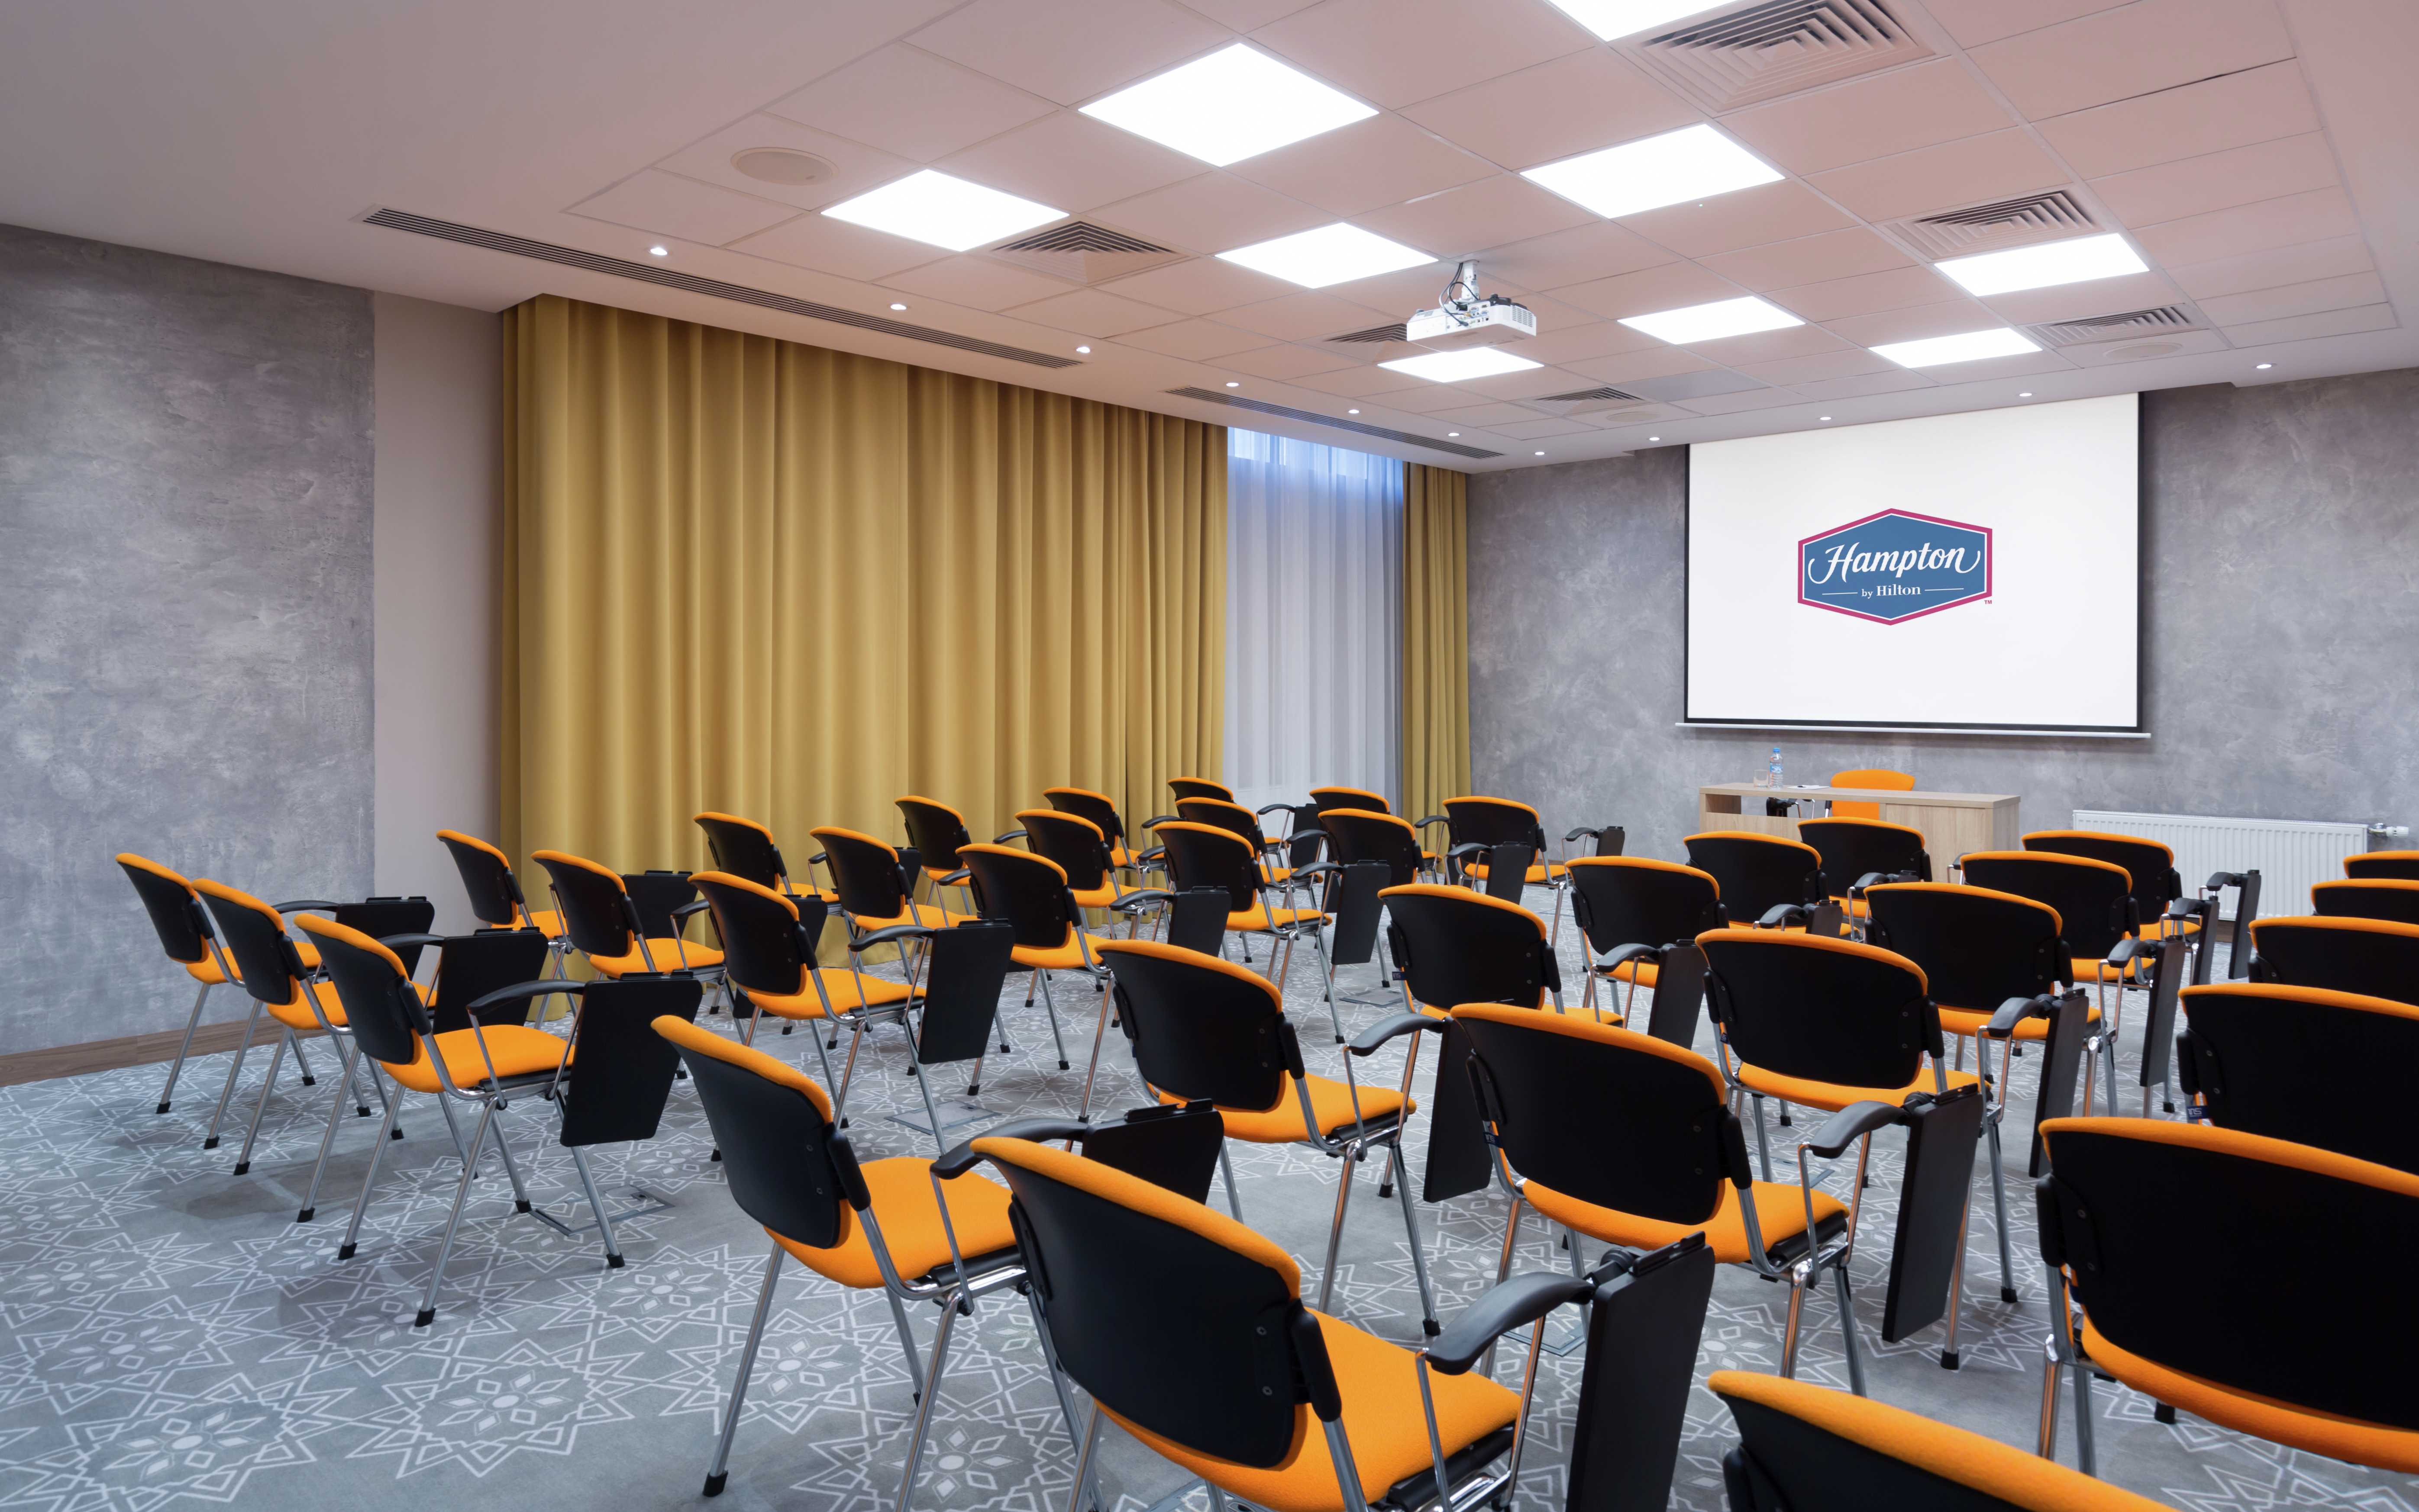 Meeting room with chairs